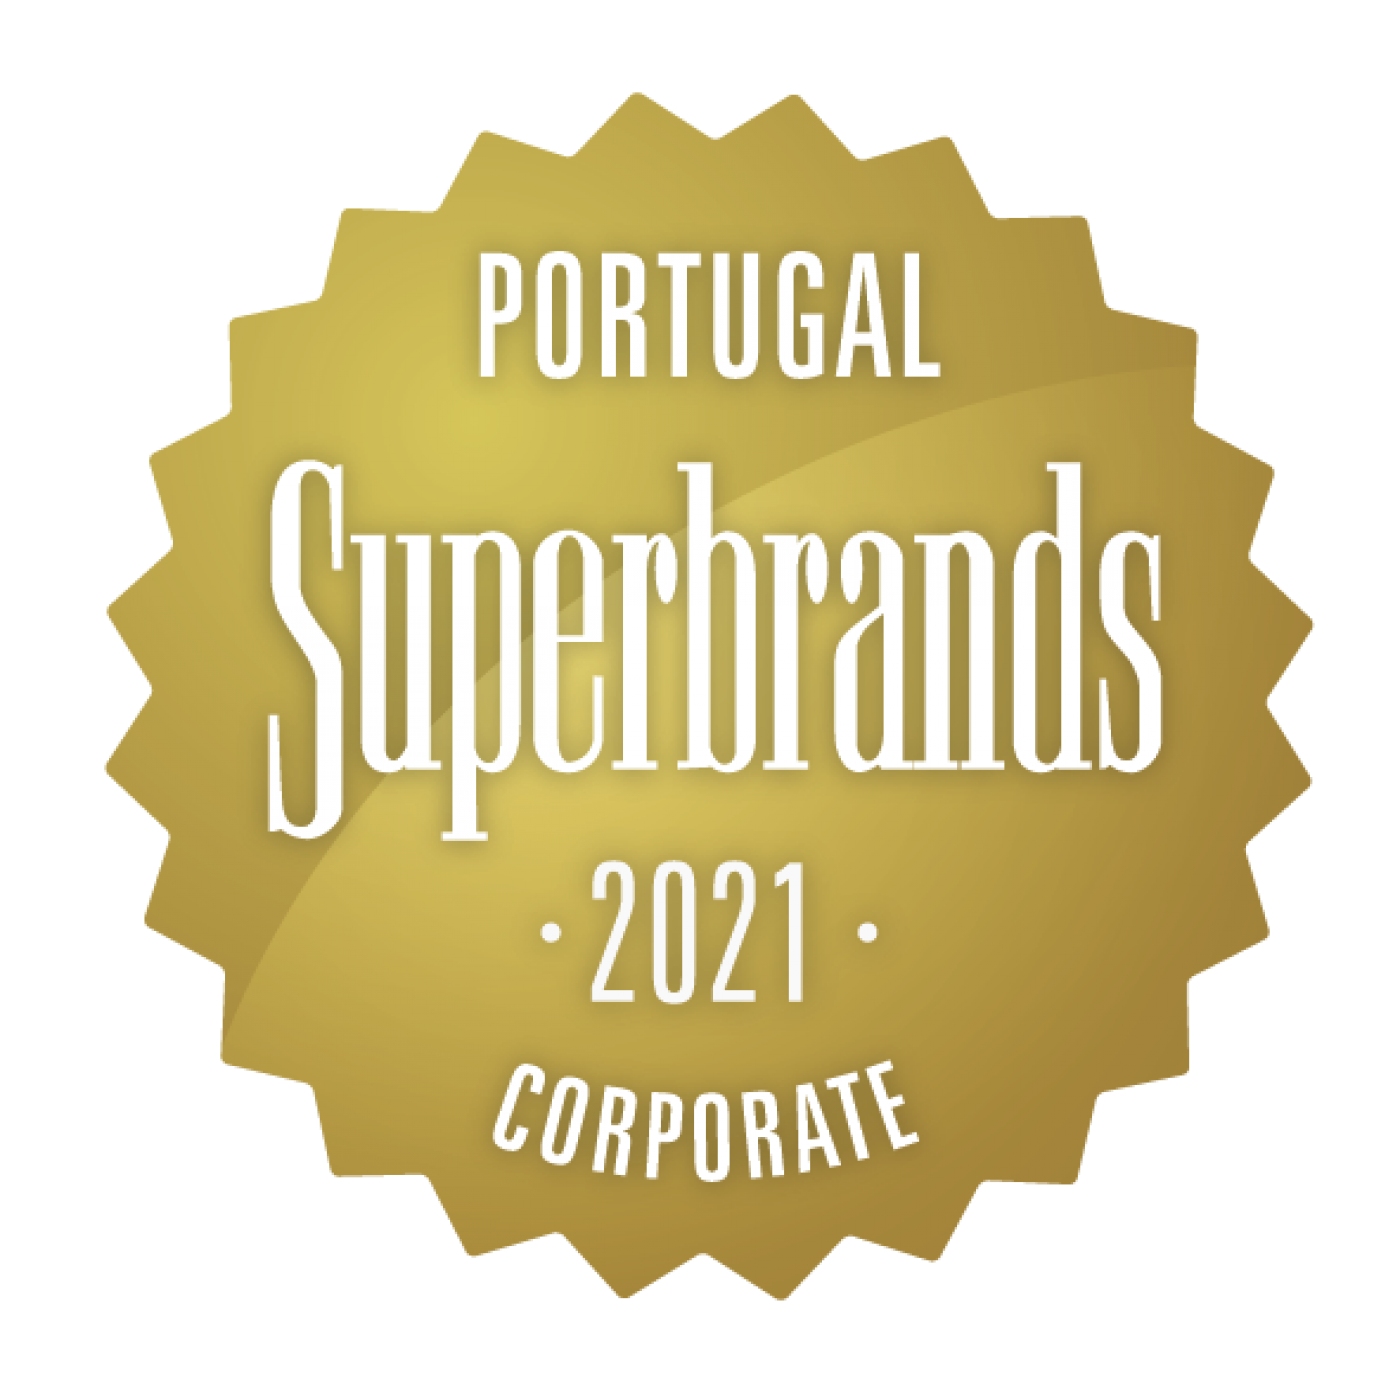 APCER IS A CORPORATE SUPERBRAND!